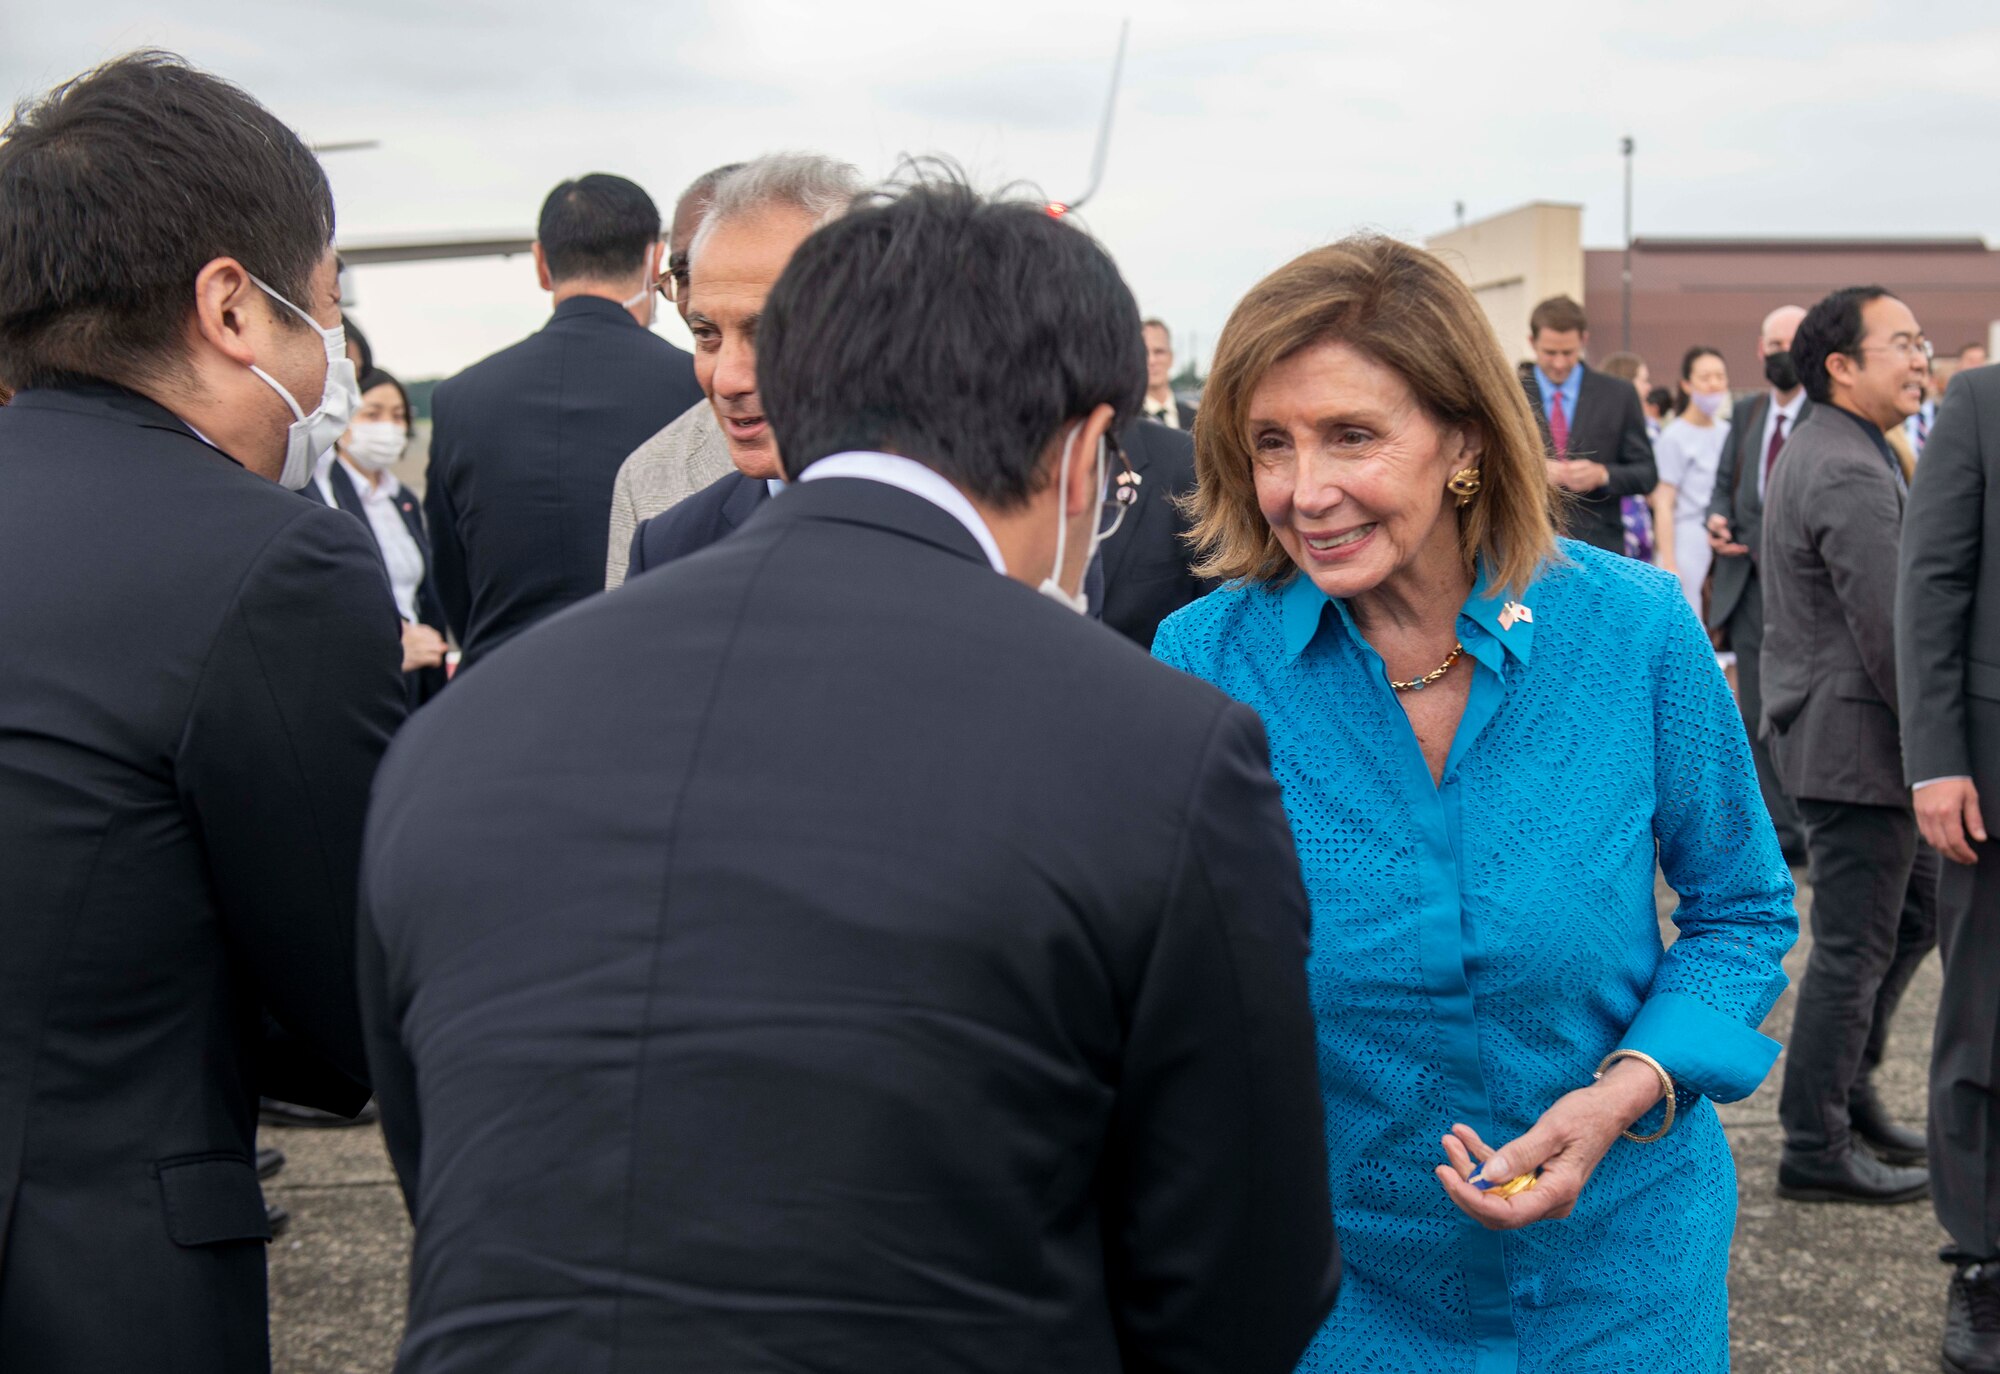 Speaker of the House Nancy Pelosi interacts with a Japanese official